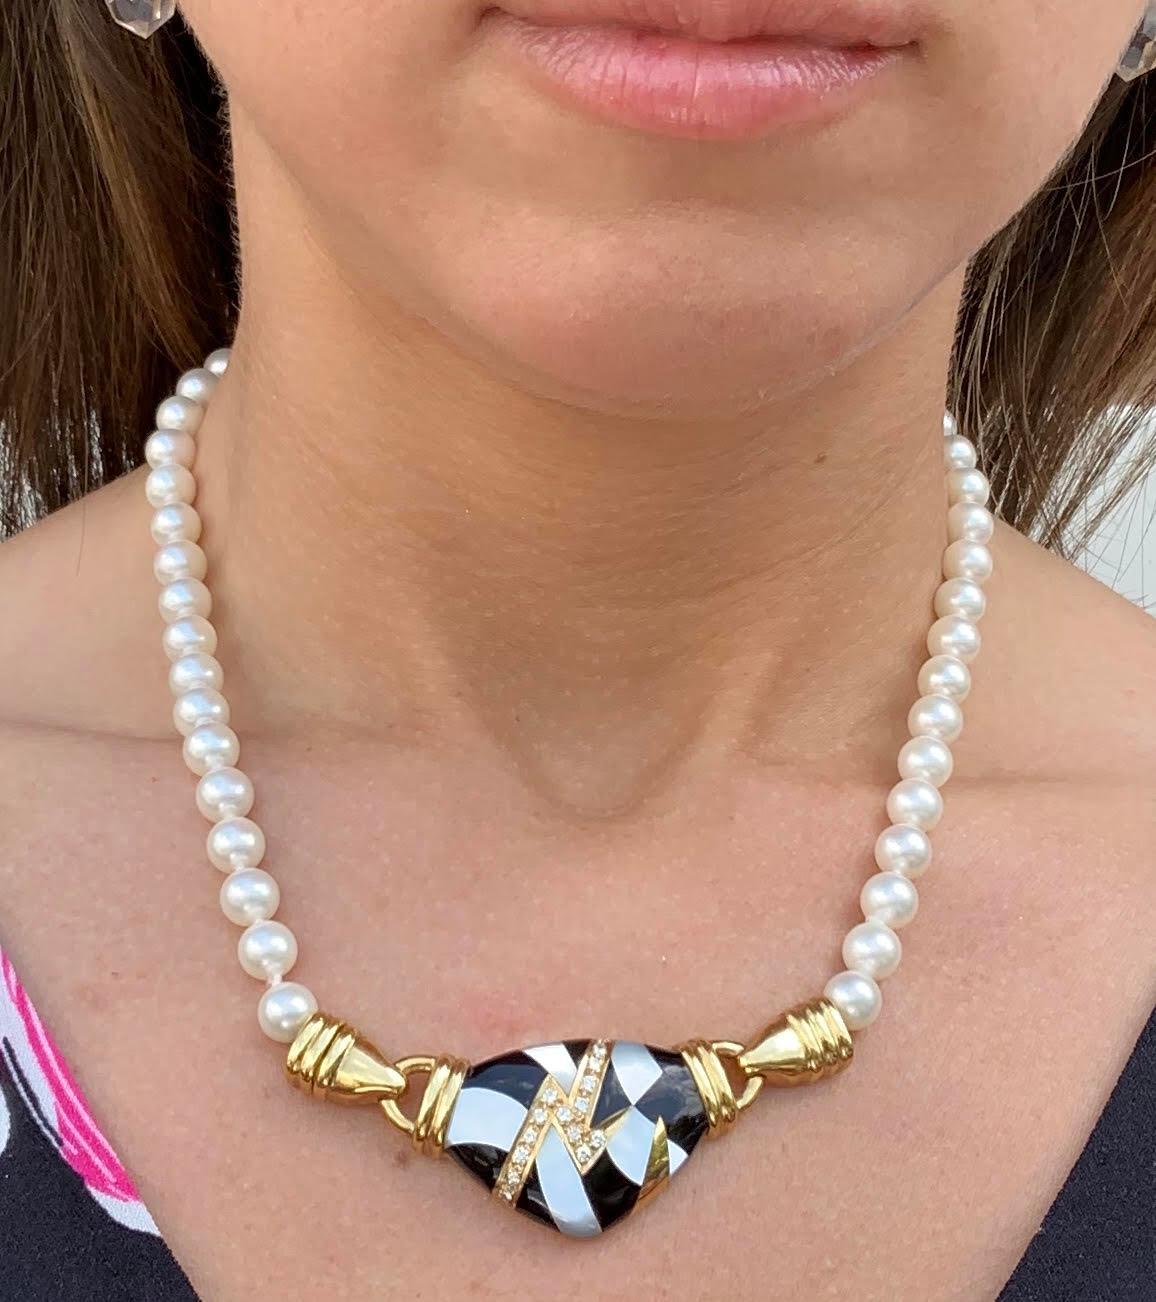 18 Karat Pearl Necklace with Diamond and Inlaid Stone Center For Sale 4